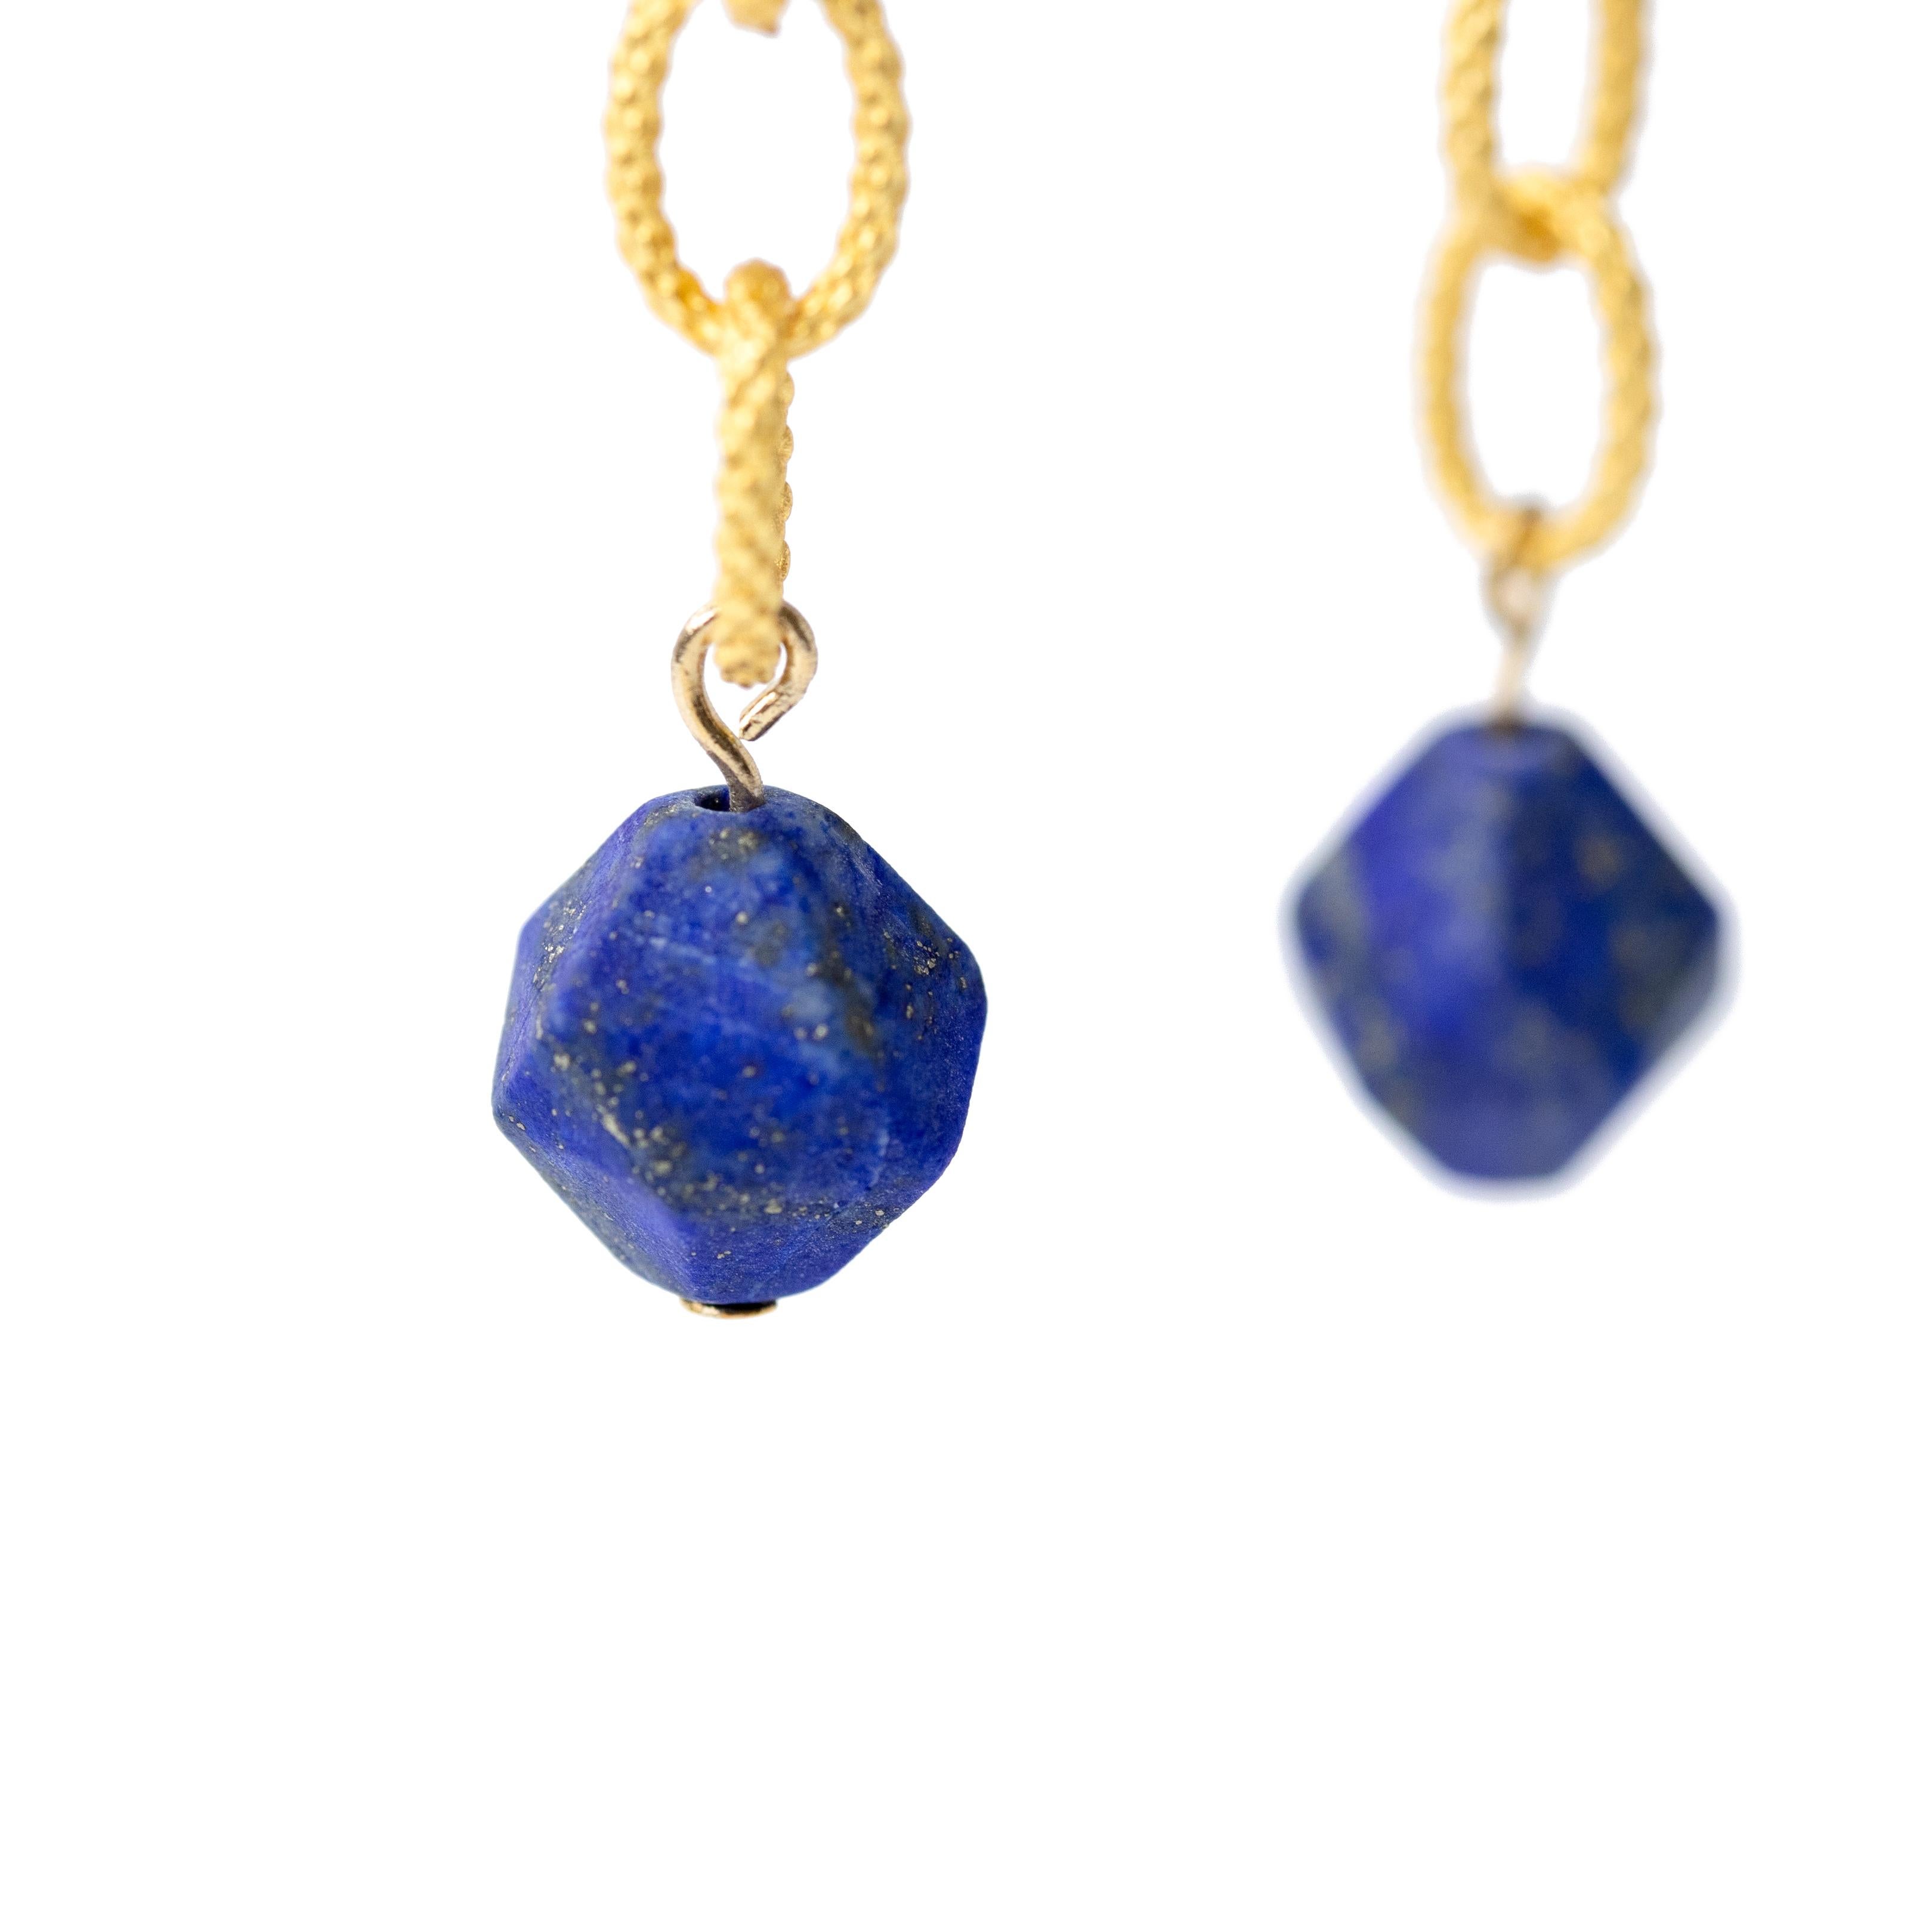 This necklace is handcrafted from Lapiz Lazuli and Detailed Gold Chain.

2.5